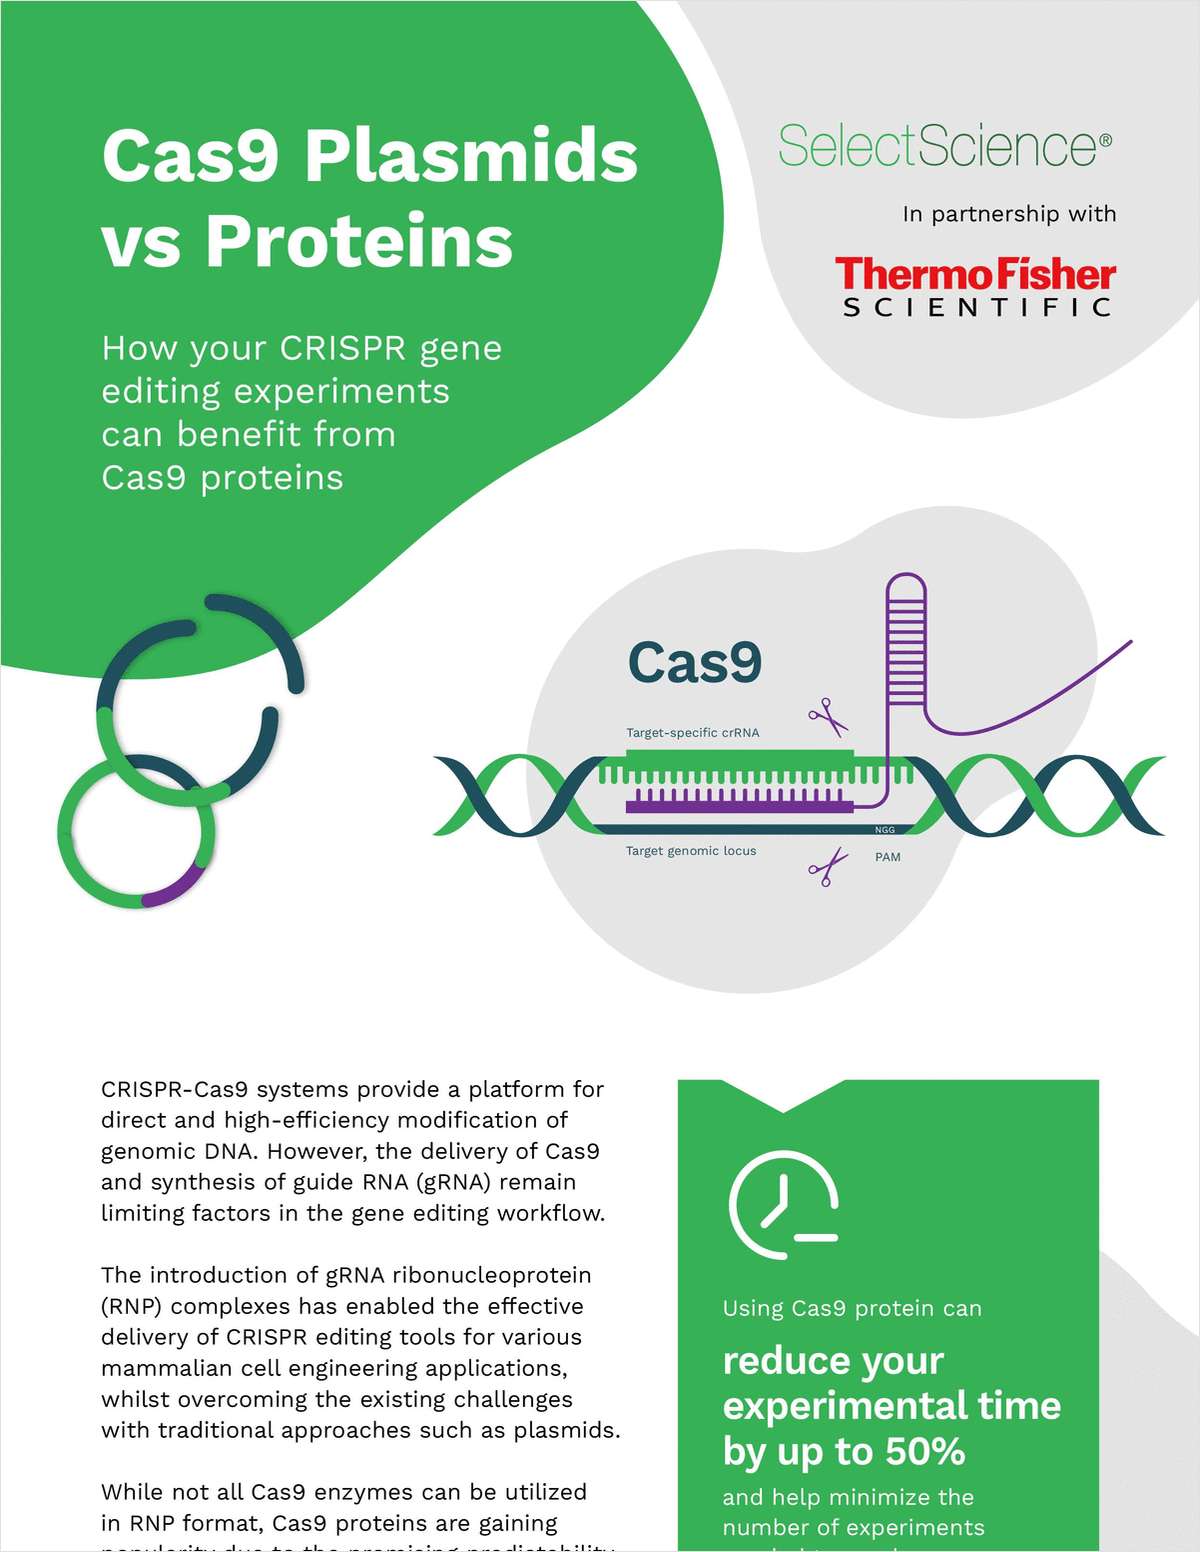 Cas9 Plasmids vs Proteins: How Your CRISPR Gene Editing Experiments Can Benefit from Cas9 Proteins